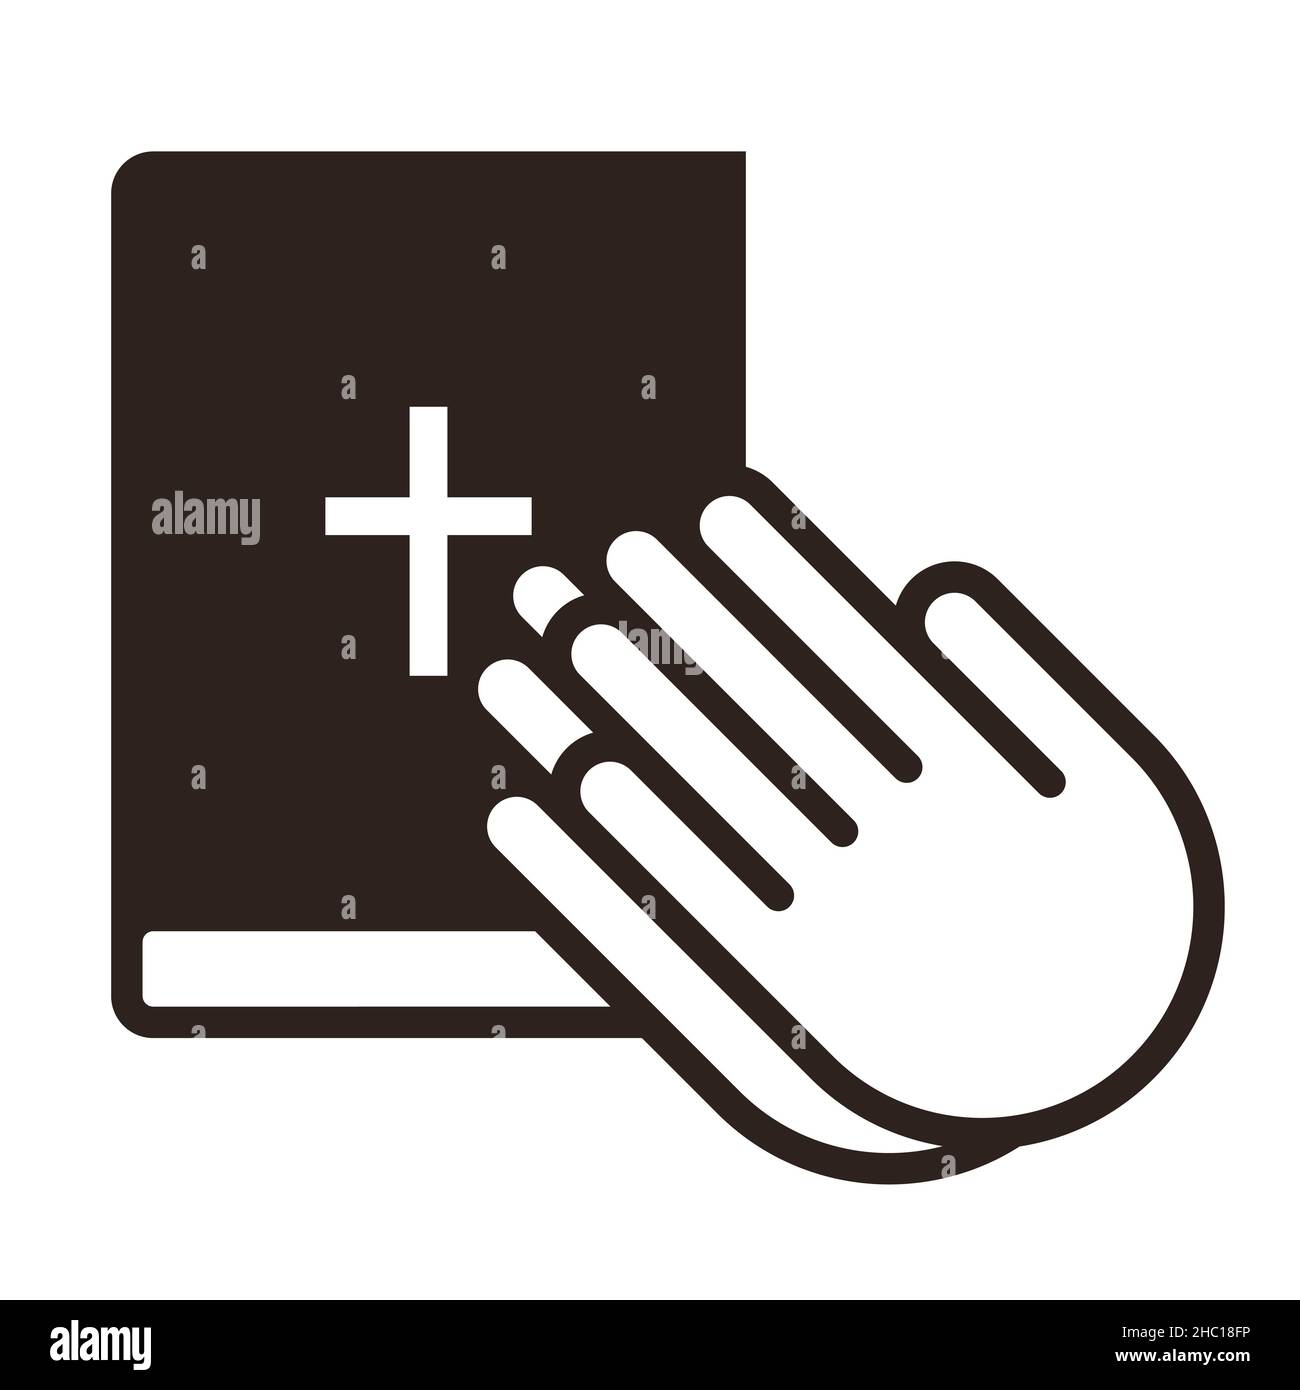 Praying hands and bible. Prayer icon isolated on white background Stock Photo